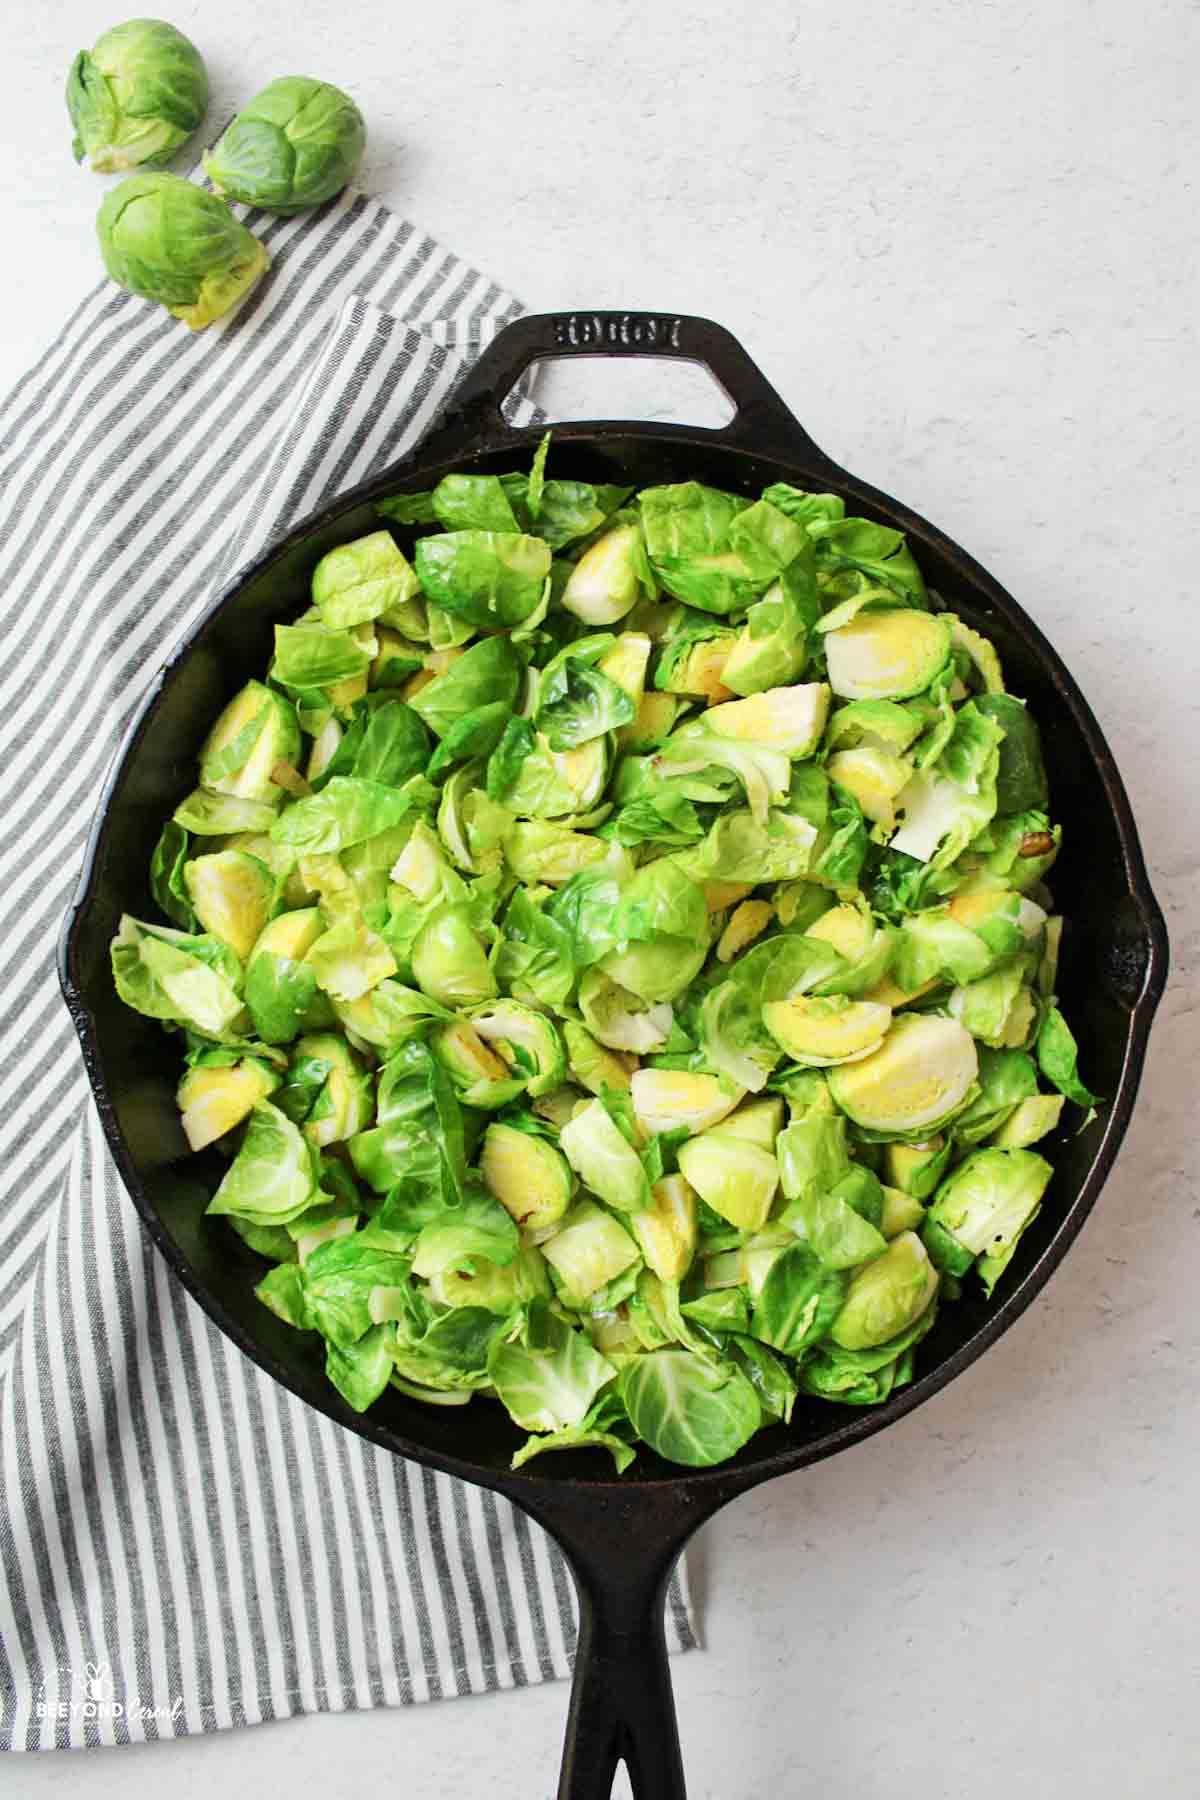 chopped brussel sprouts in a cast iron skillet.